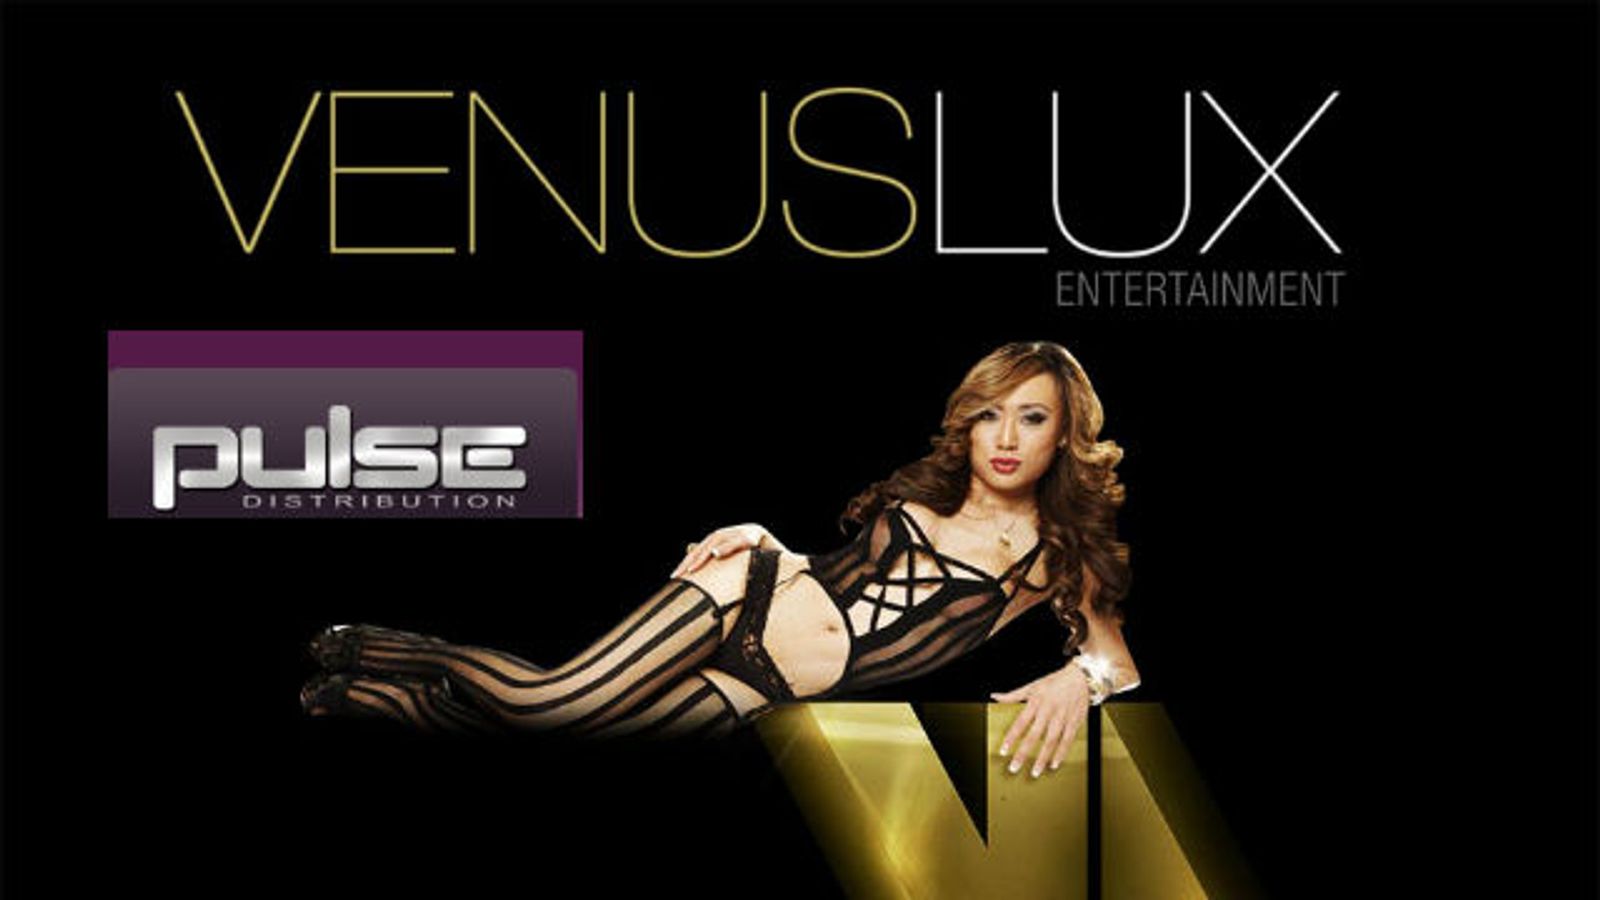 Venus Lux Signs Exclusive Deal with Pulse Distribution